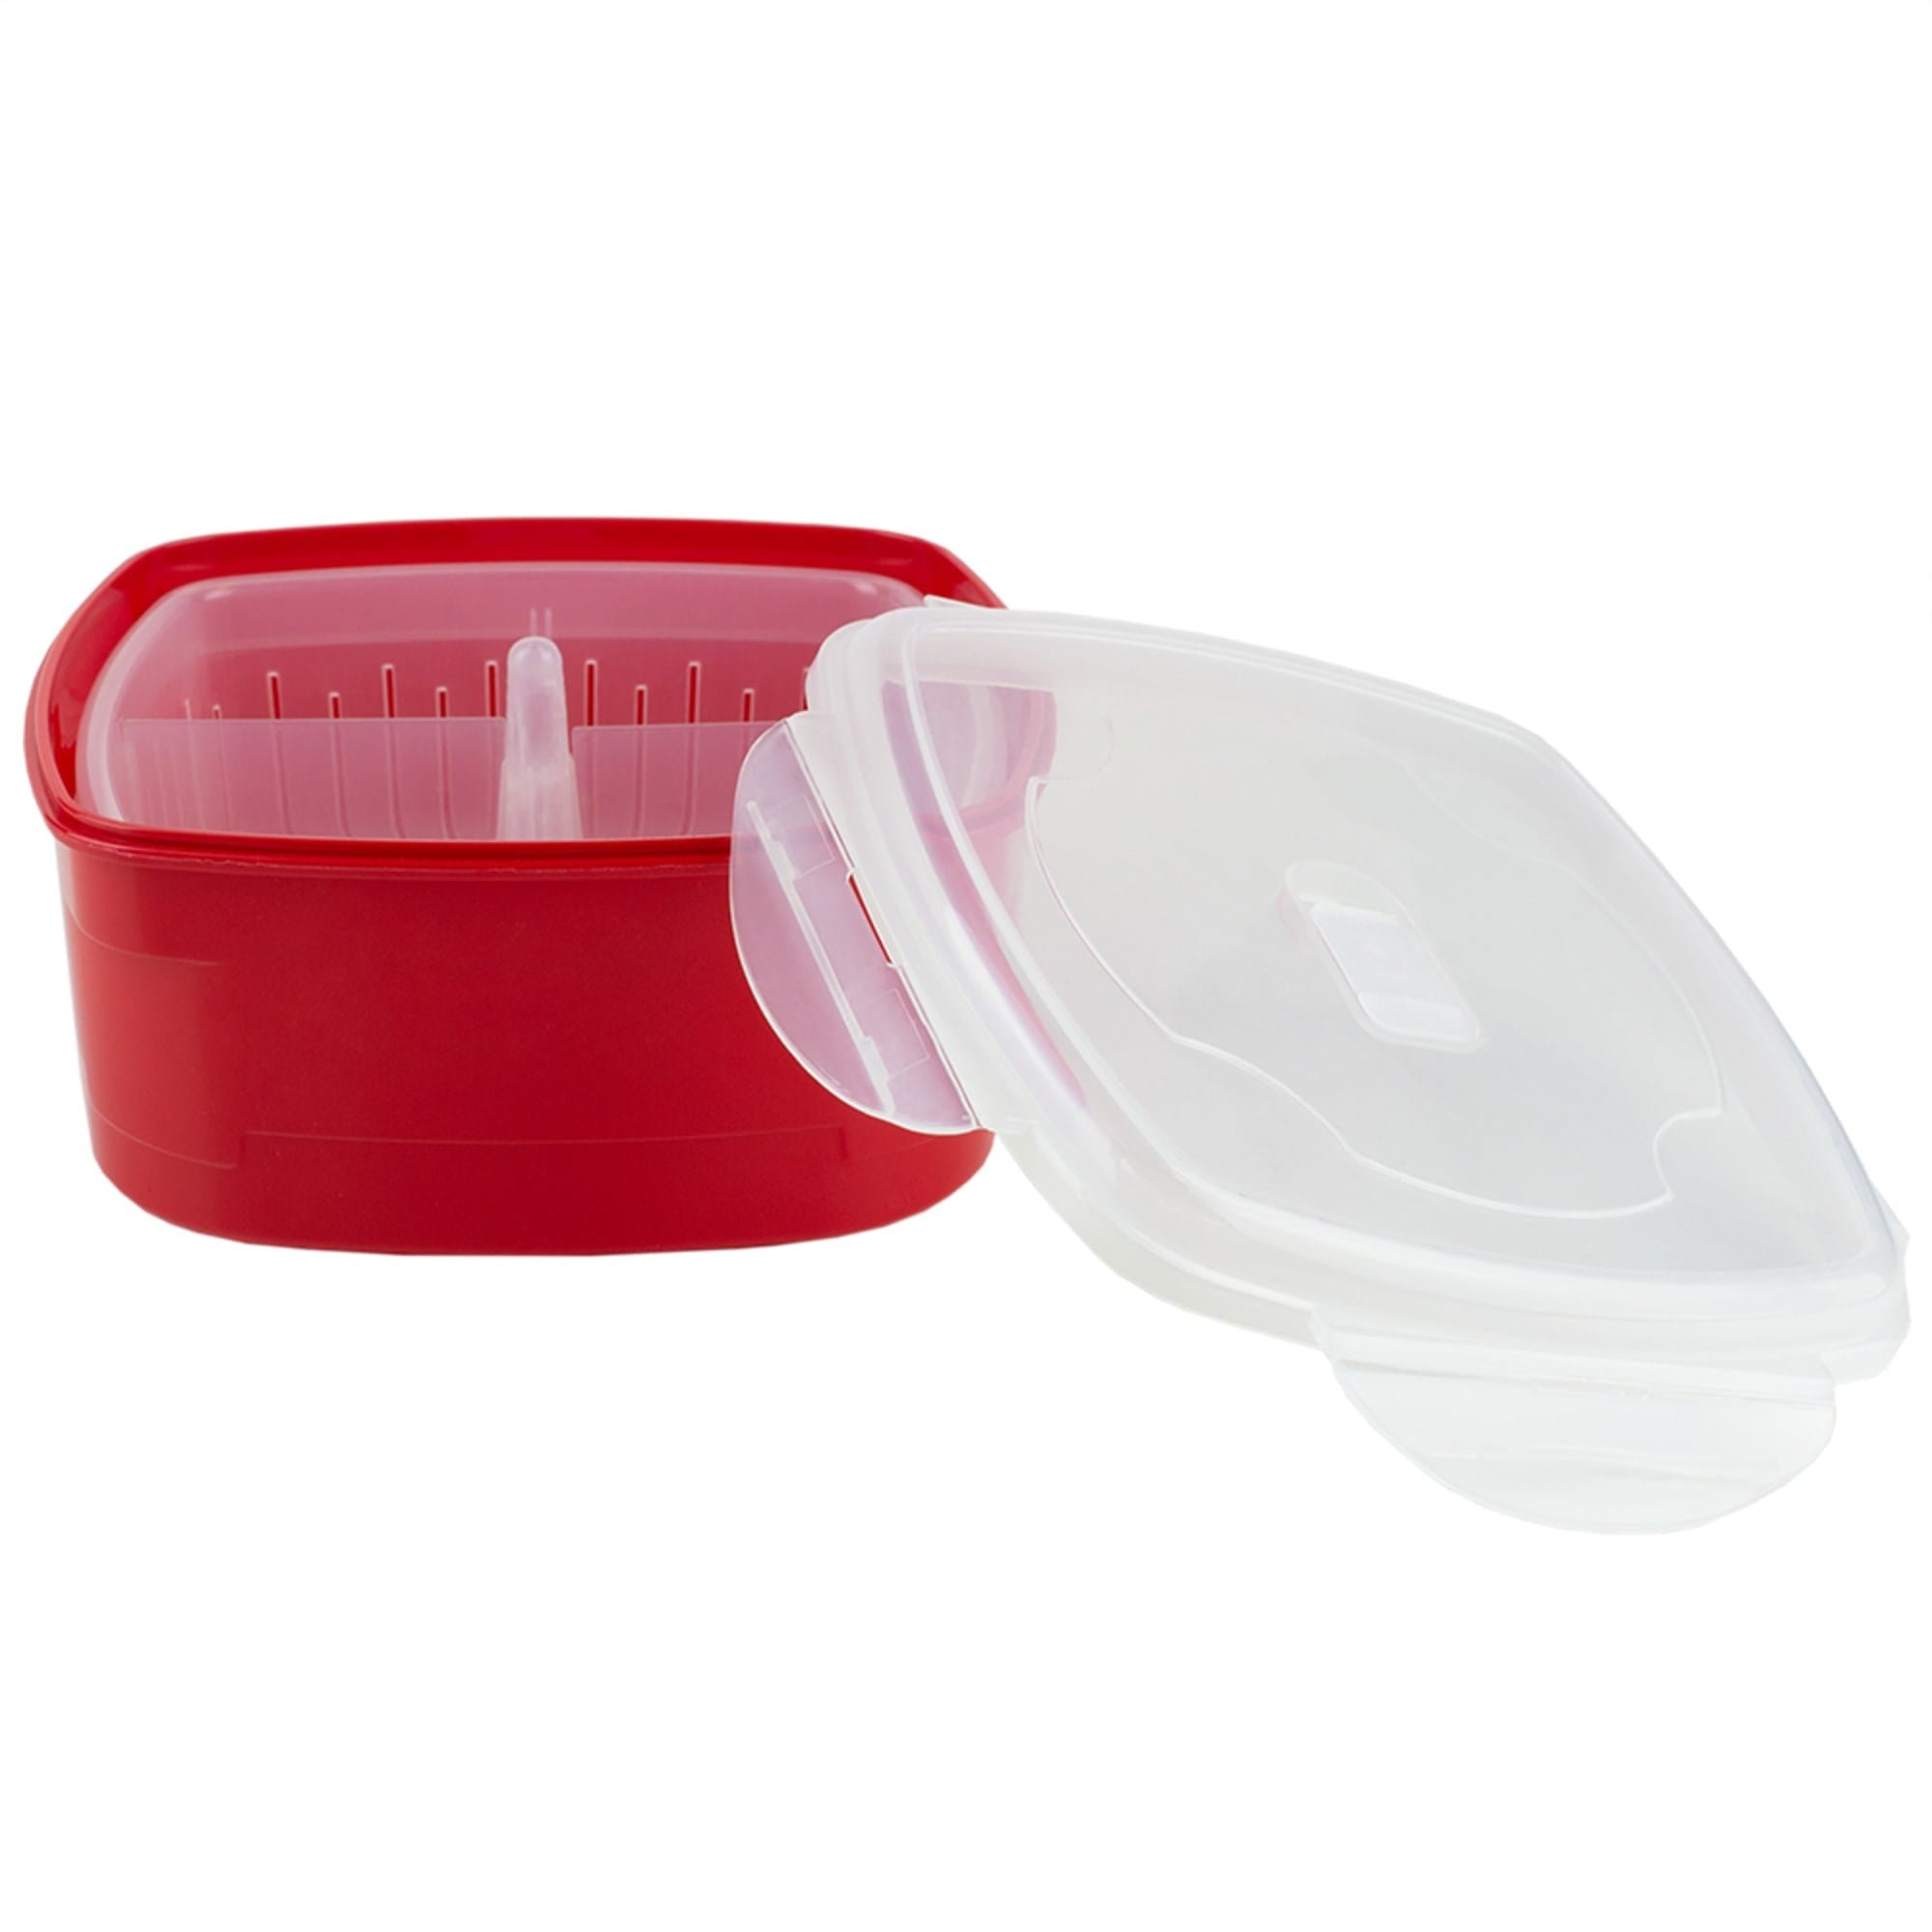 Home Basics Adjustable 4-Section Plastic Microwave Plastic Steamer, Red $5 EACH, CASE PACK OF 12